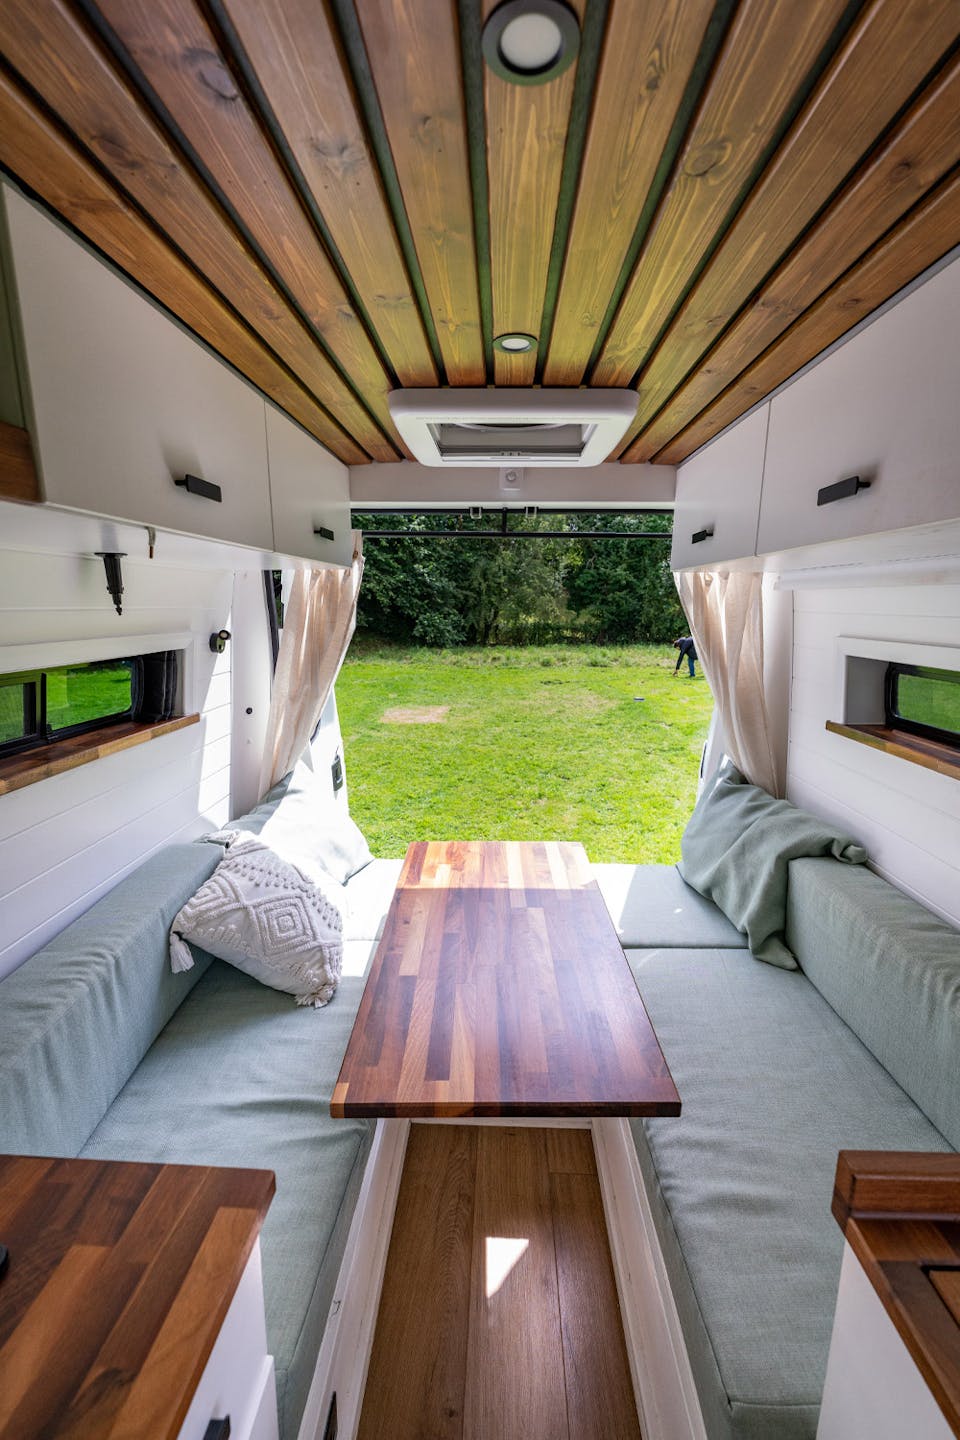 Van conversion with Dinette bed system